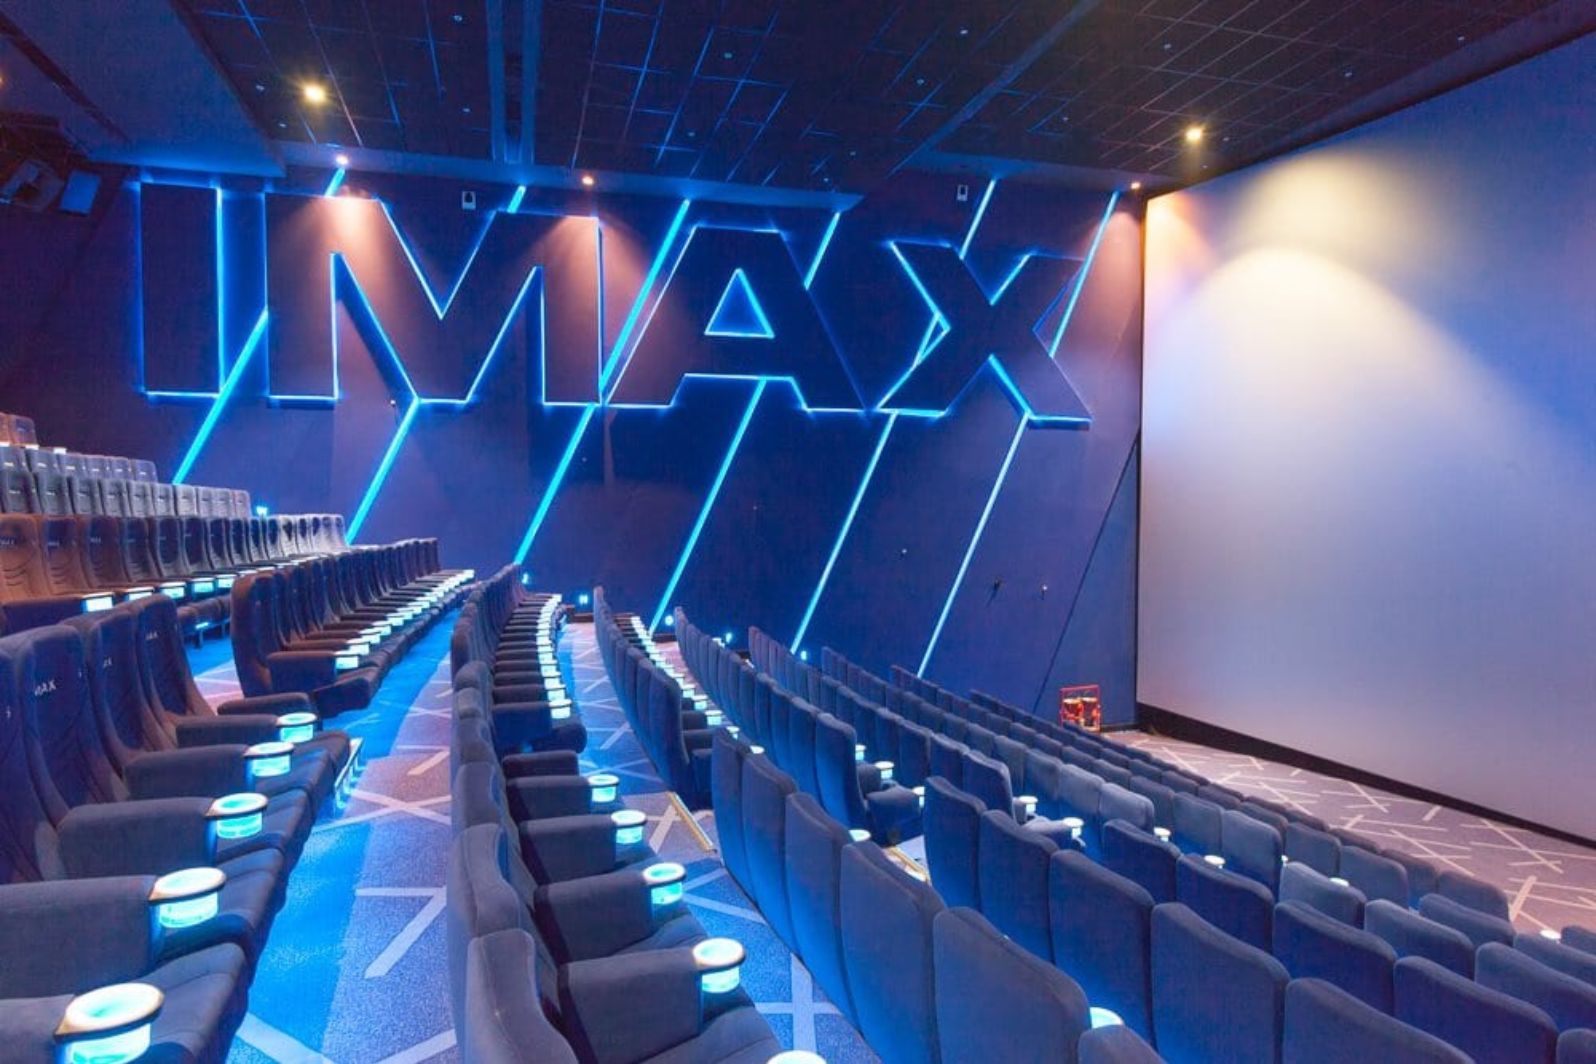 pune imax 3d theater